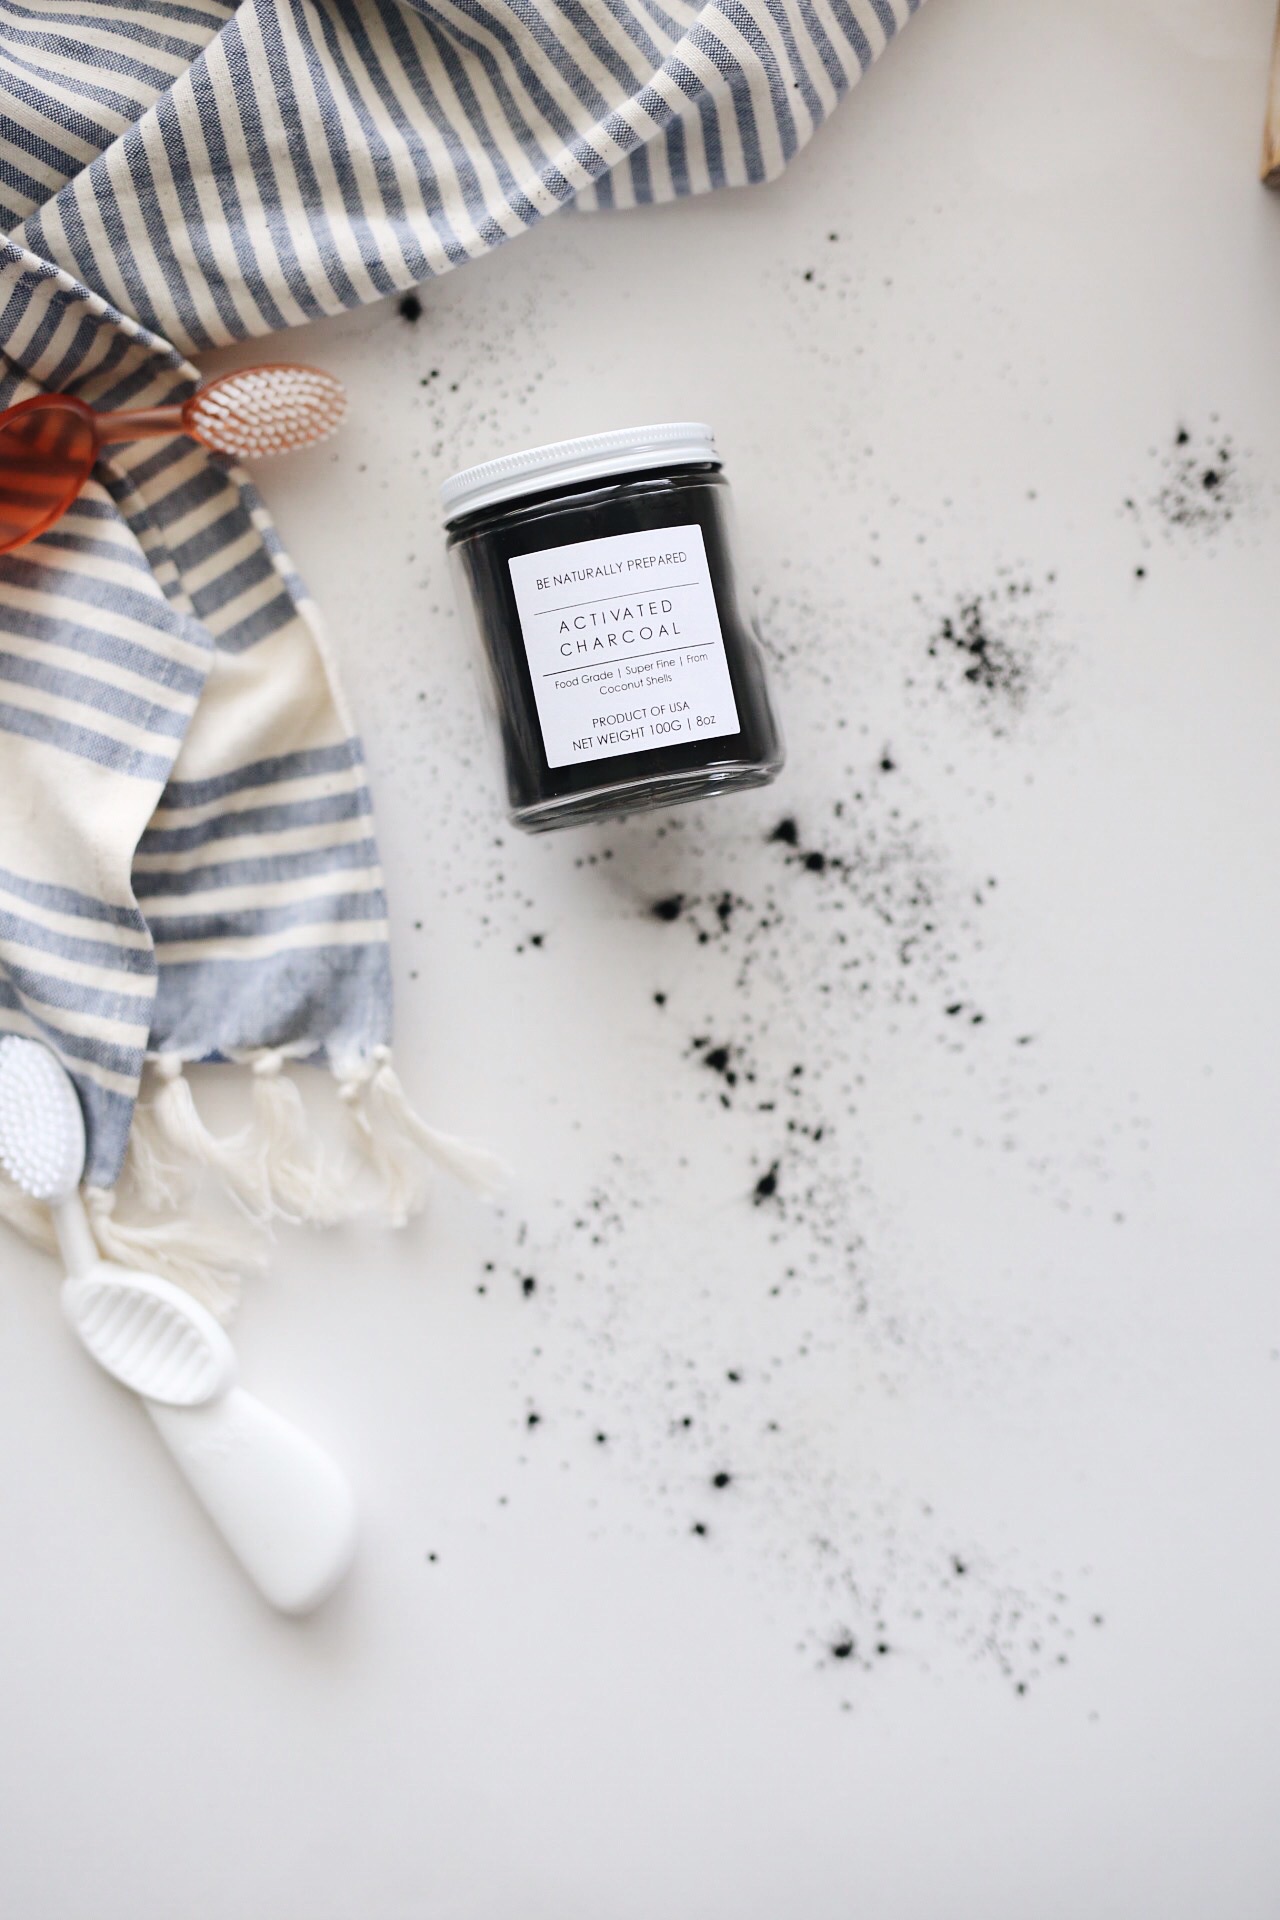 whitening your teeth with activated charcoal | elanaloo.com